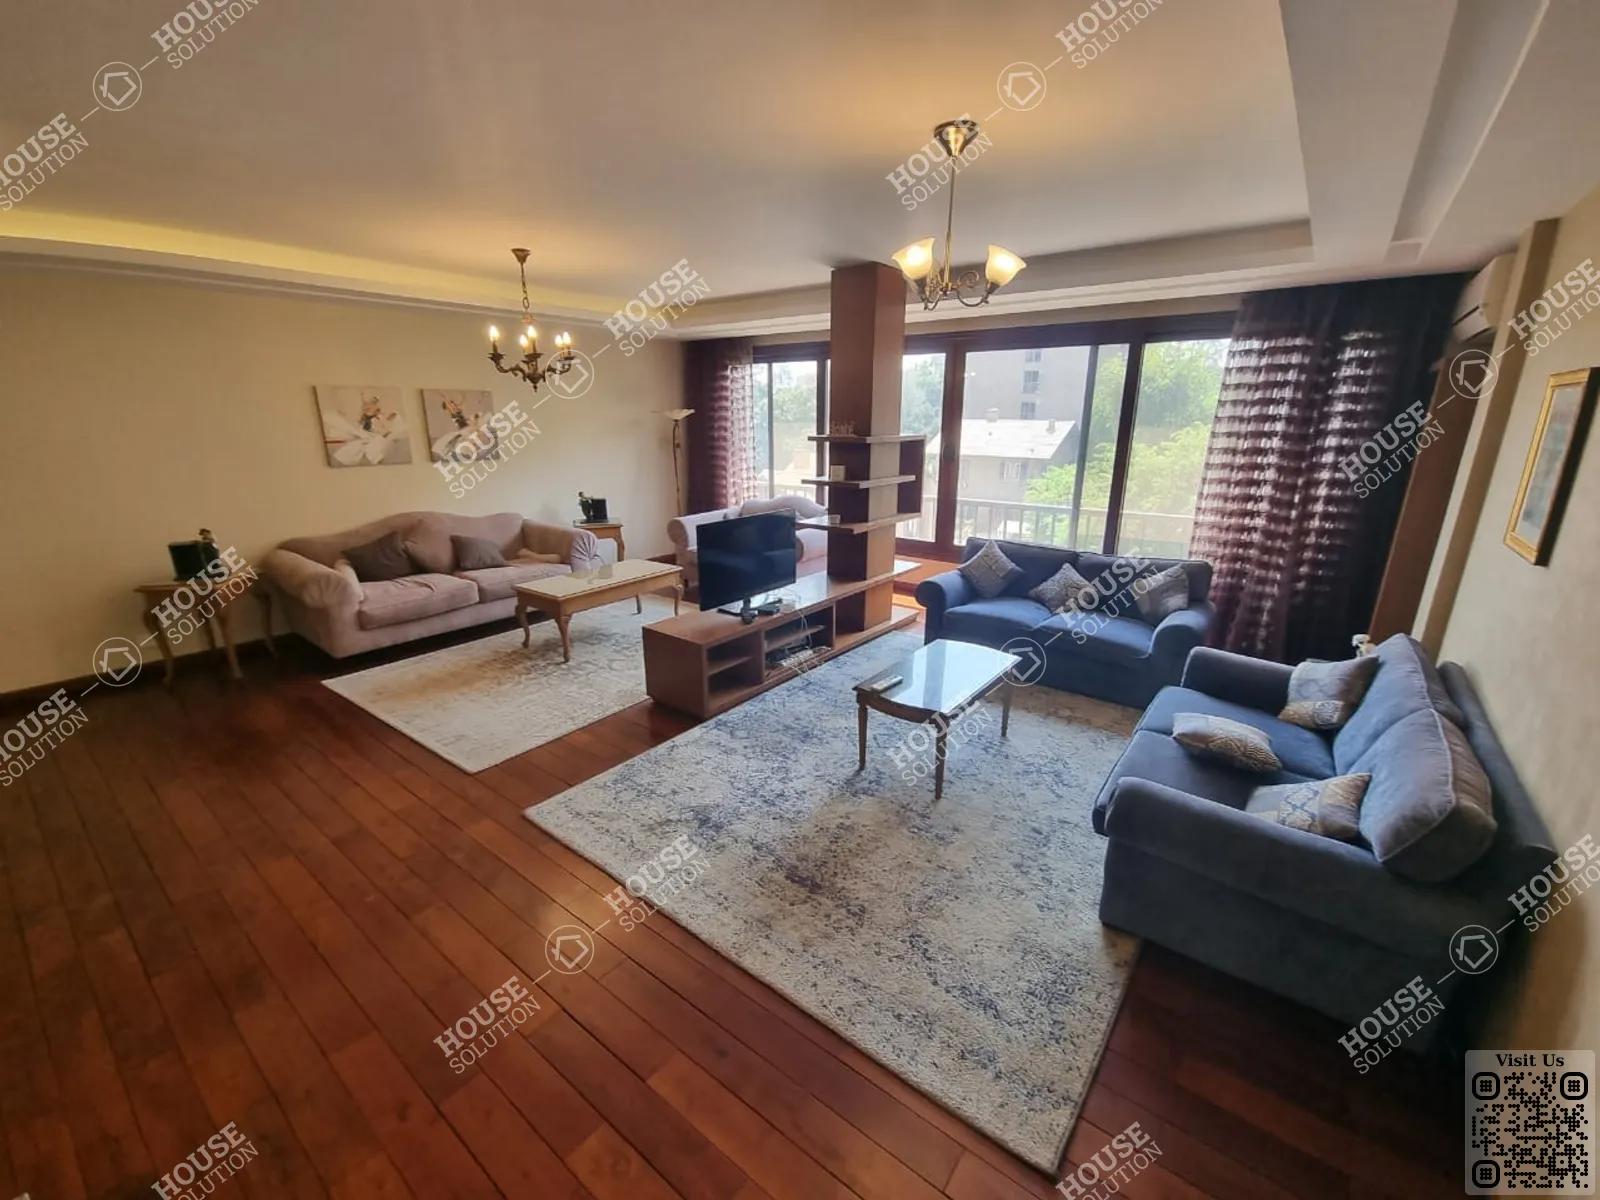 RECEPTION  @ Apartments For Rent In Maadi Maadi Sarayat Area: 160 m² consists of 2 Bedrooms 2 Bathrooms Modern furnished 5 stars #3641-0